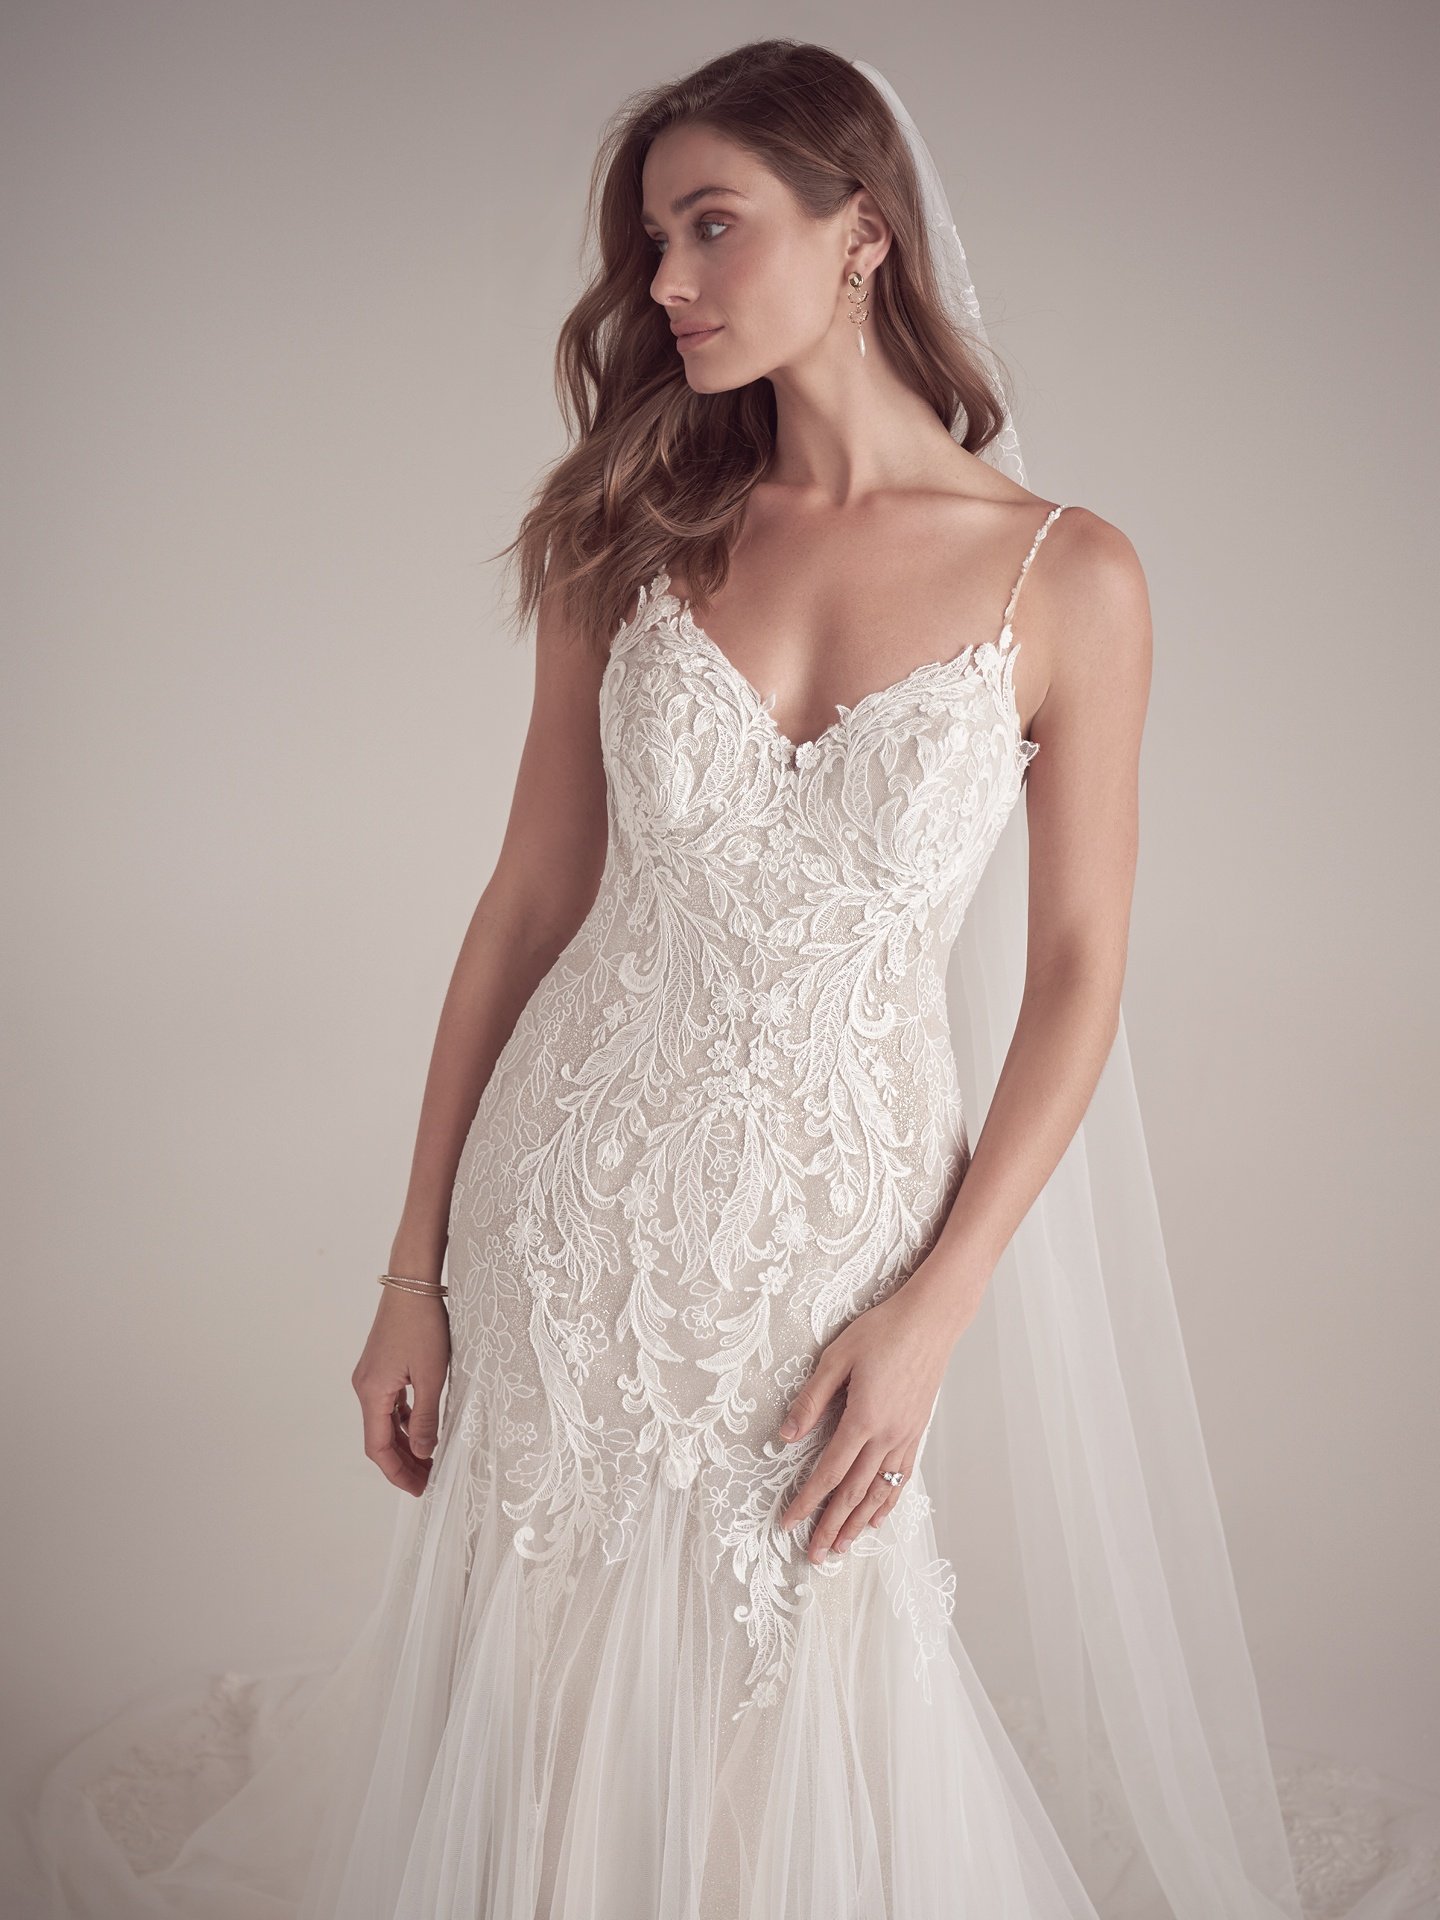 Maggie-Sottero-Aviano-Fit-and-Flare-Wedding-Dress-22MC925A01-Alt2-ND.jpg